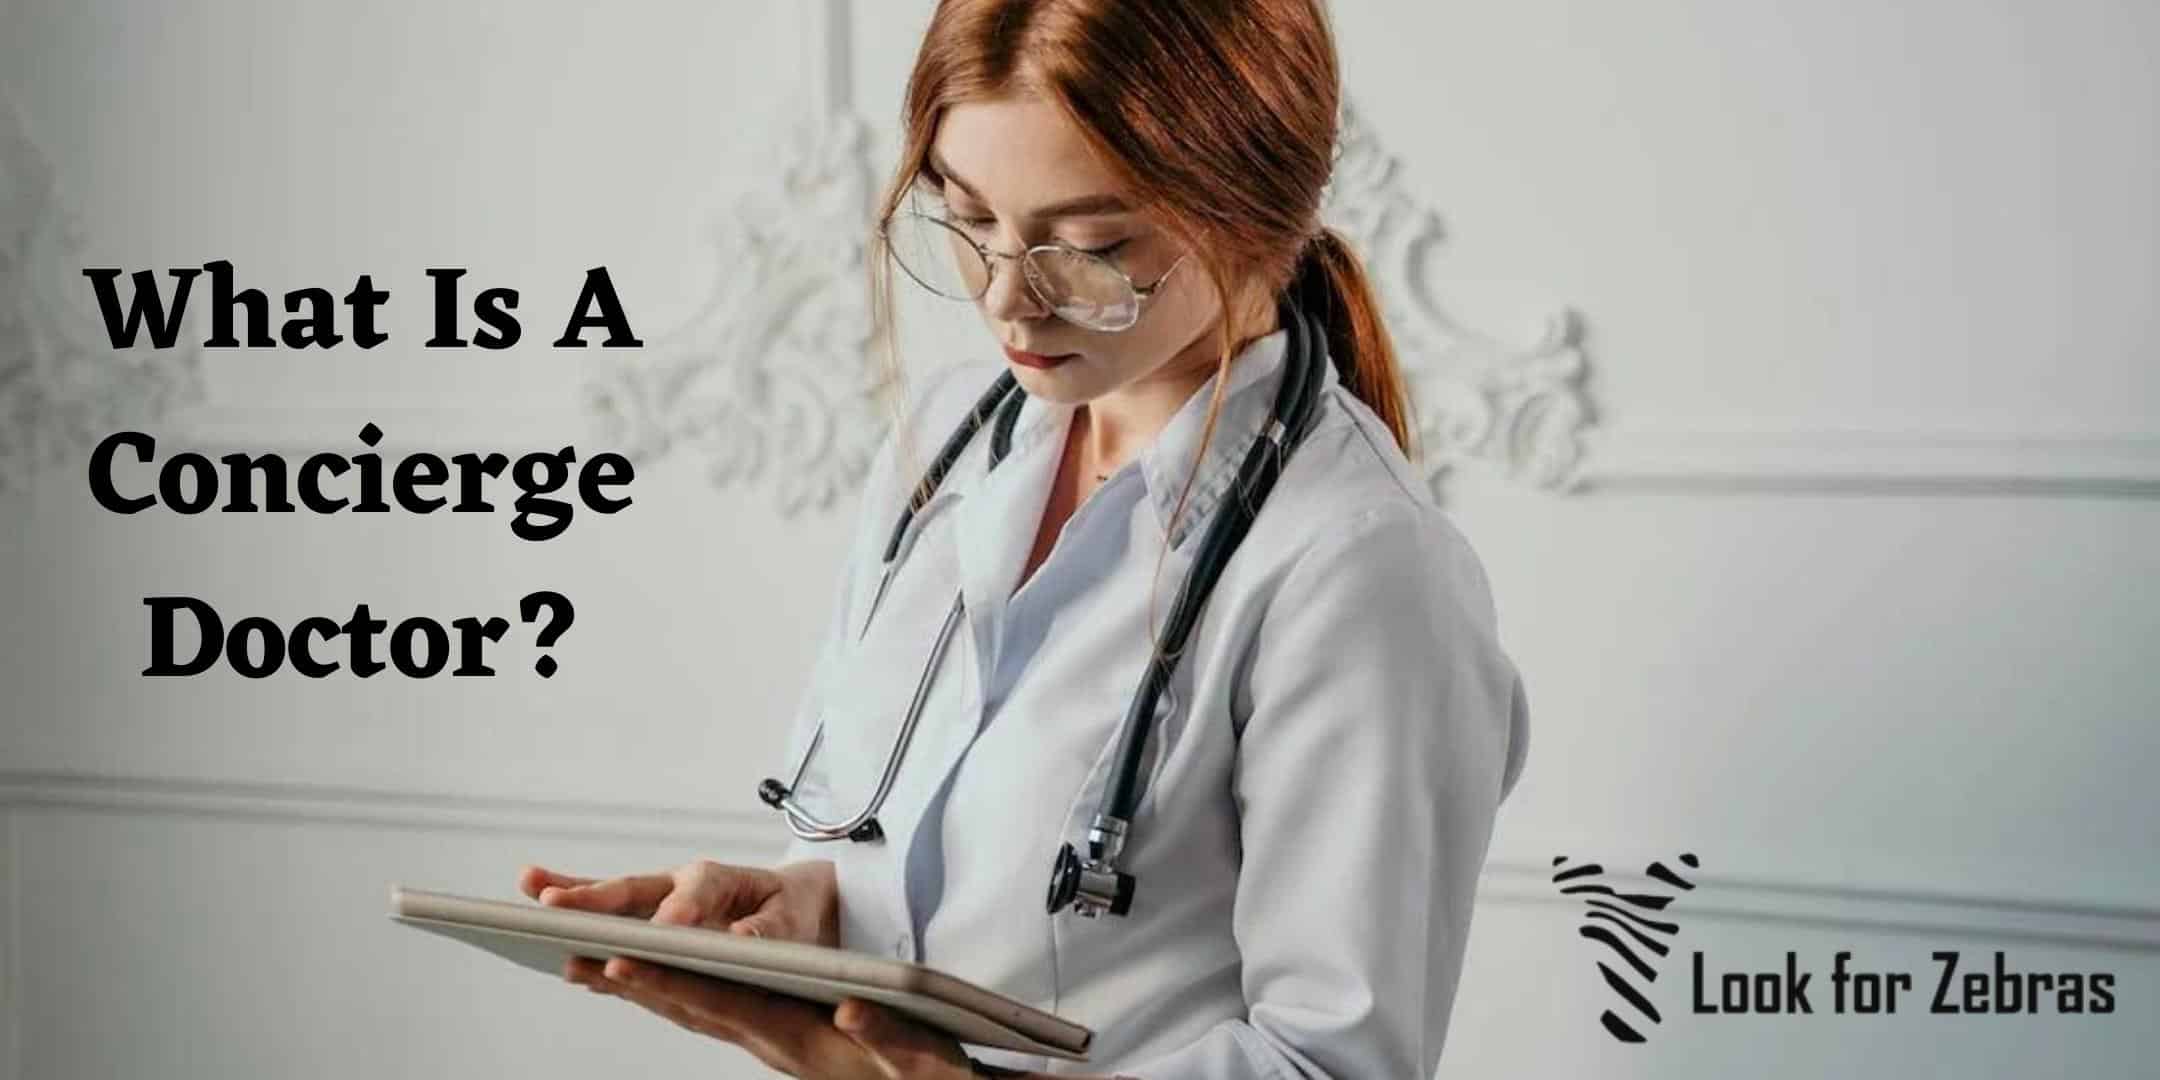 Coincerge doctor